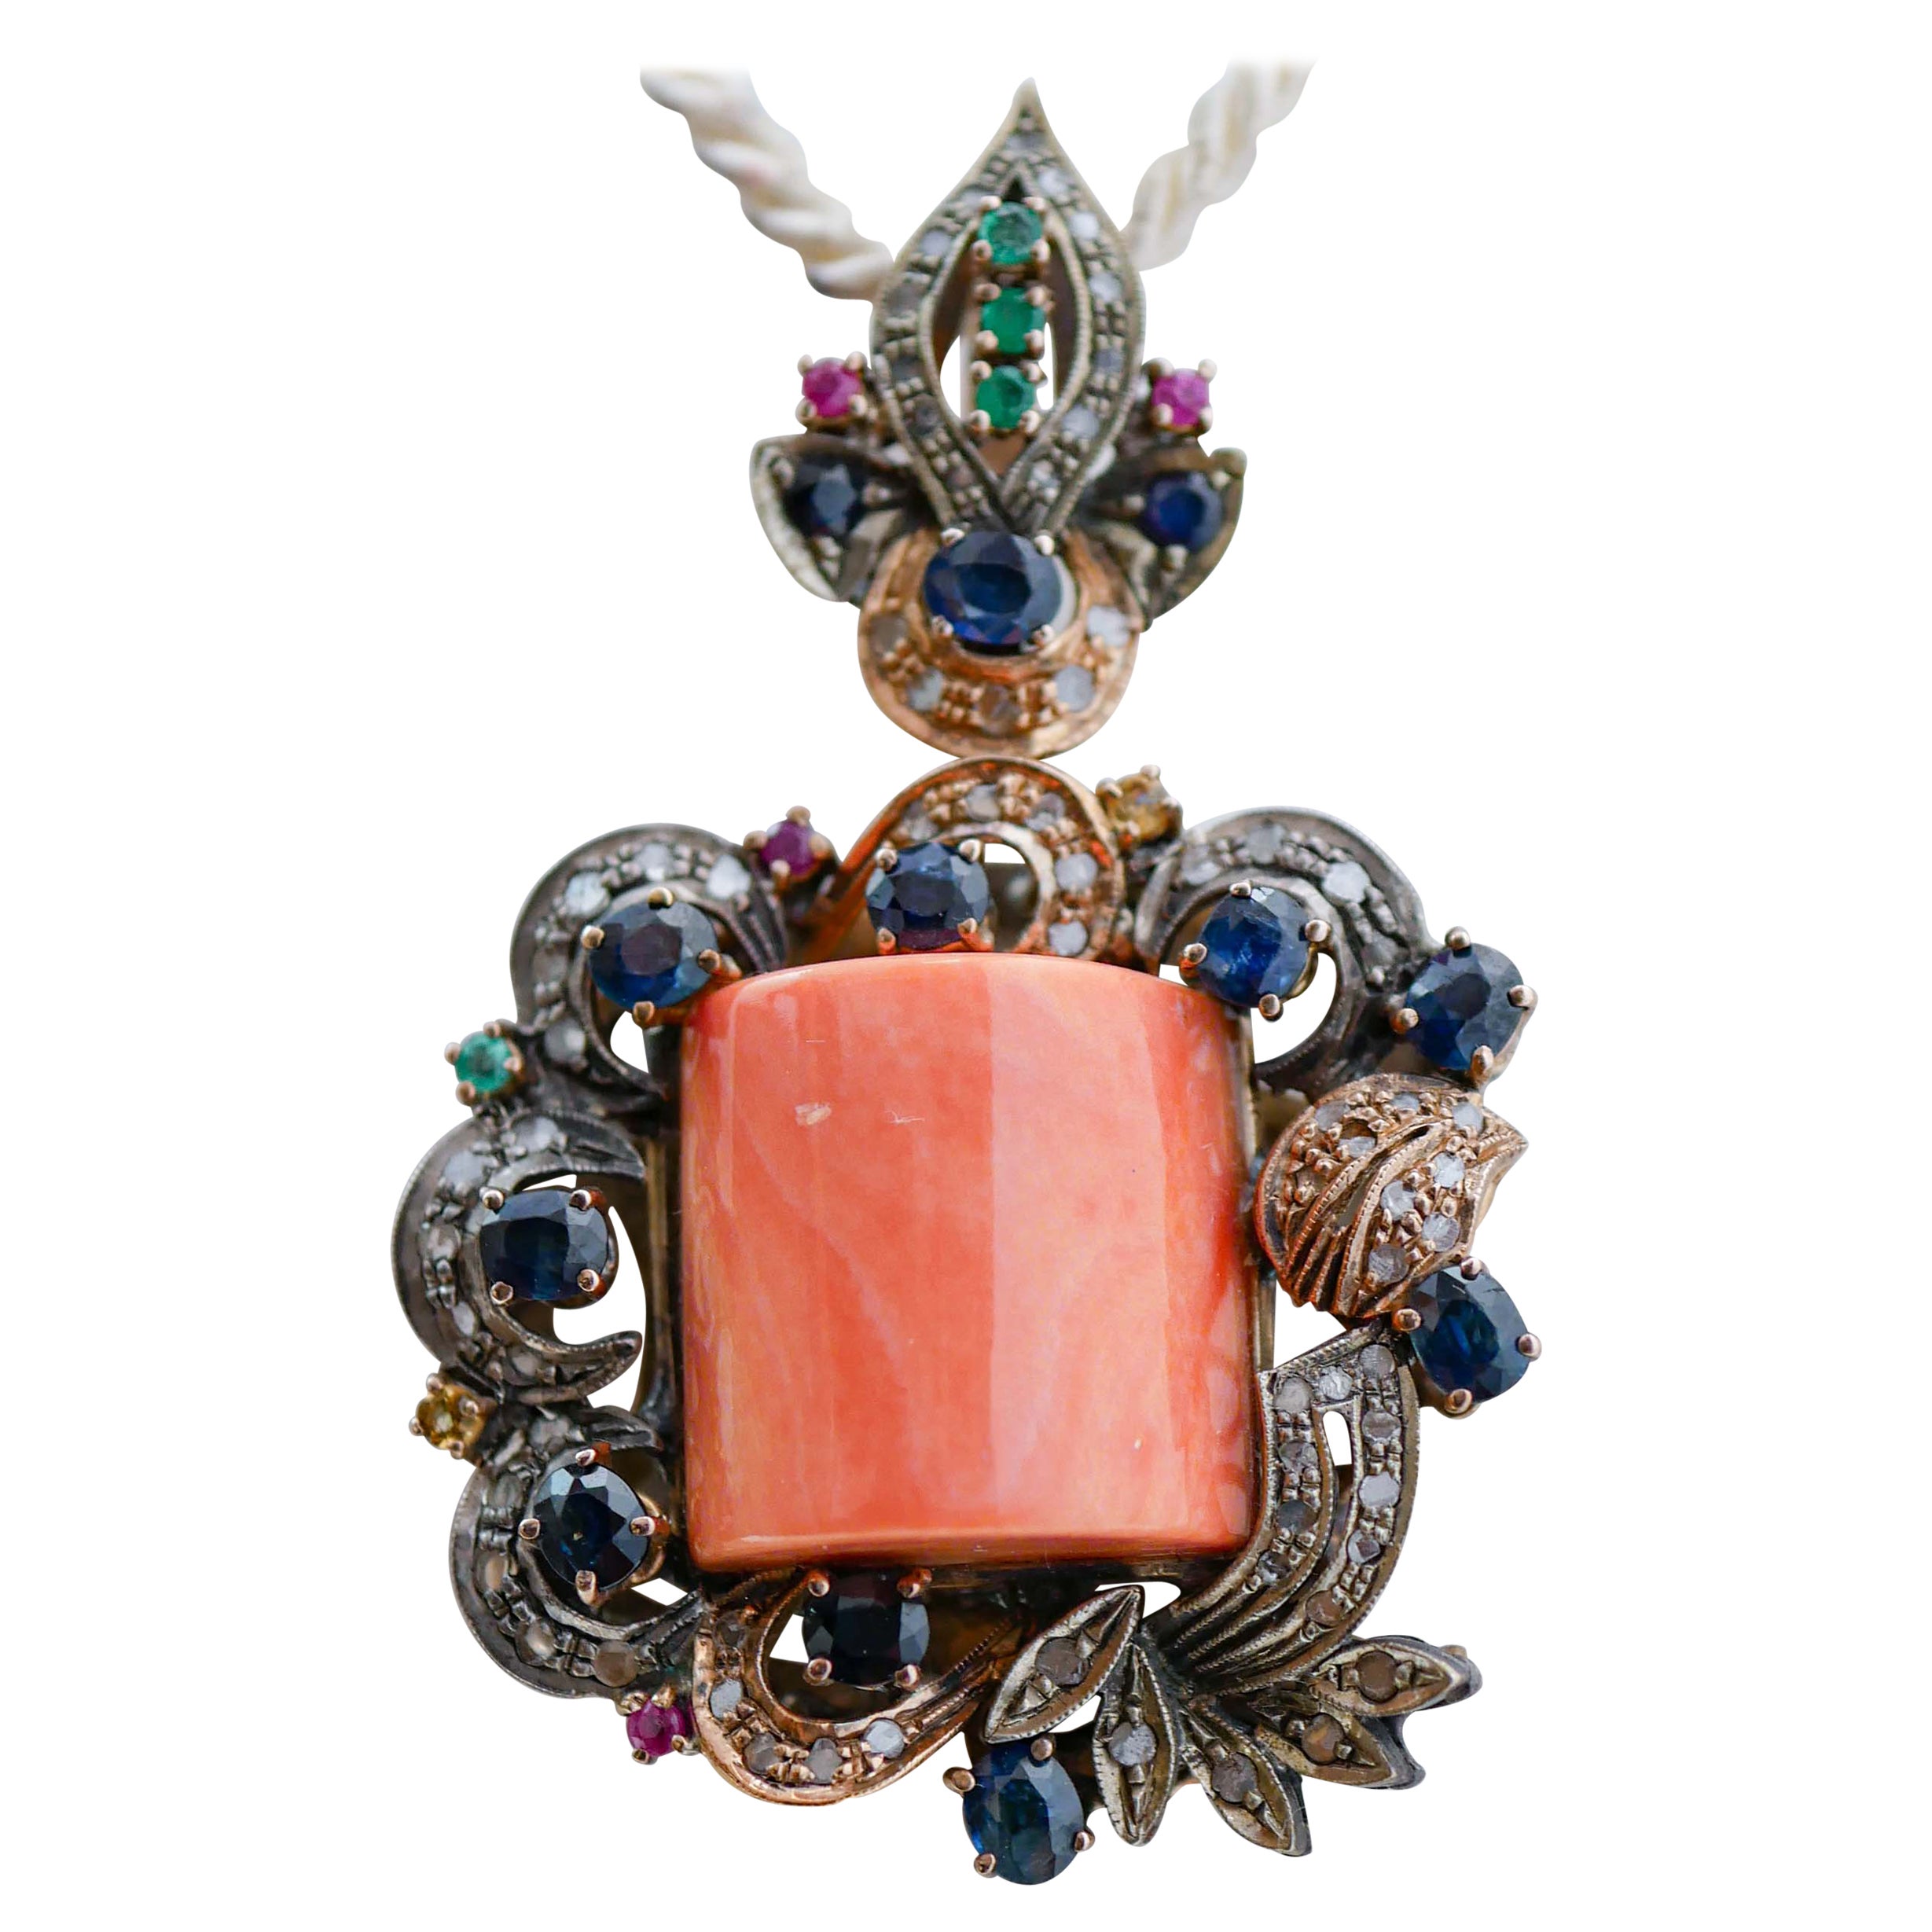 Coral, Emeralds, Rubies, Sapphires, Diamonds, Rose Gold and Silver Pendant.